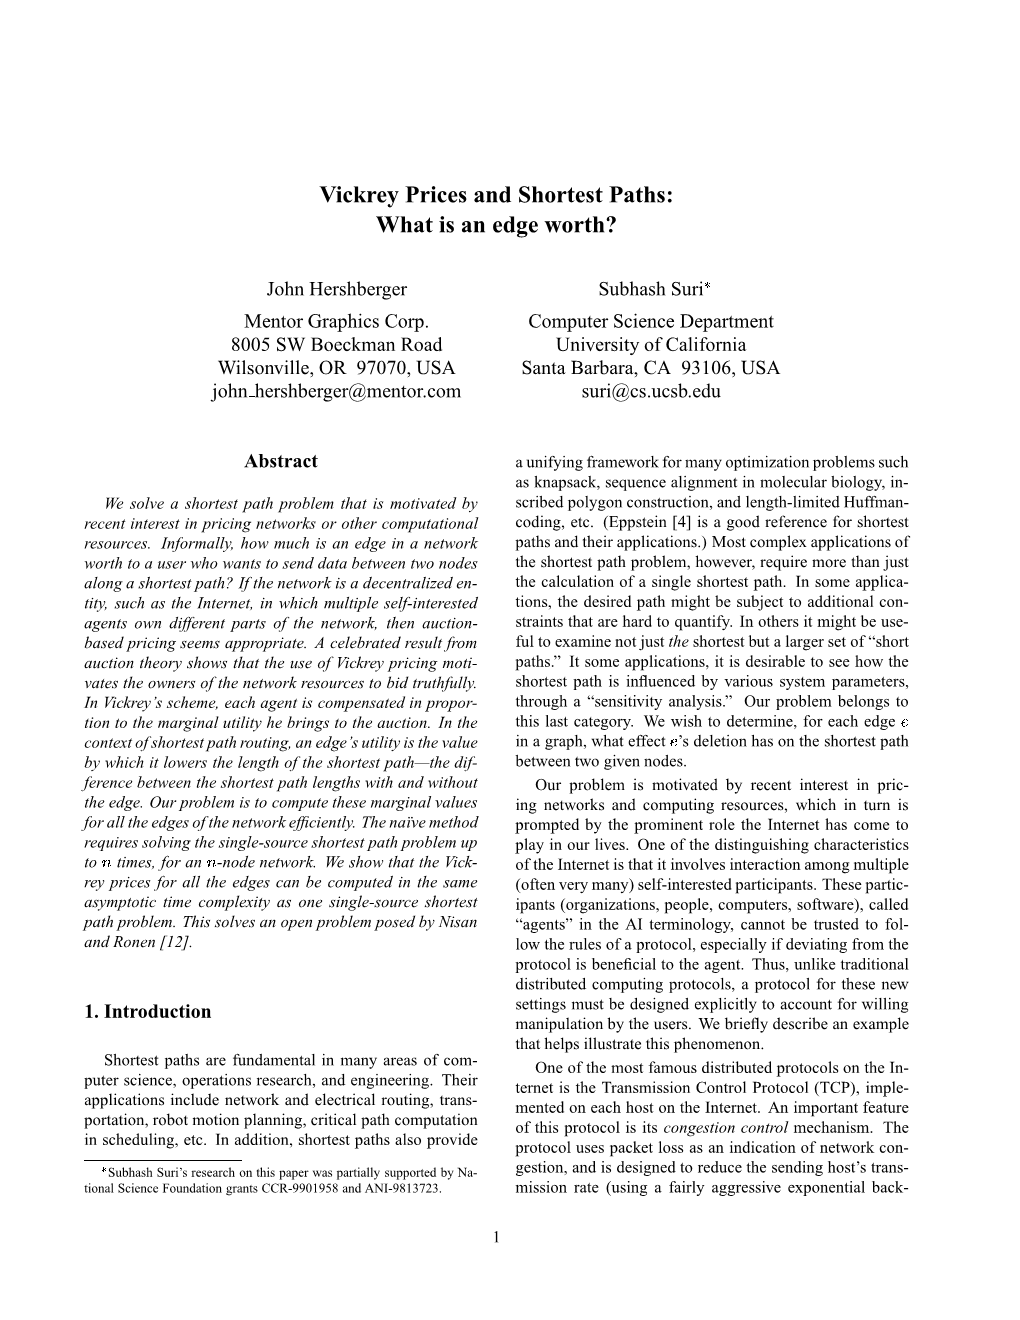 Paper on Computing Clarke Payments for Shortest Paths